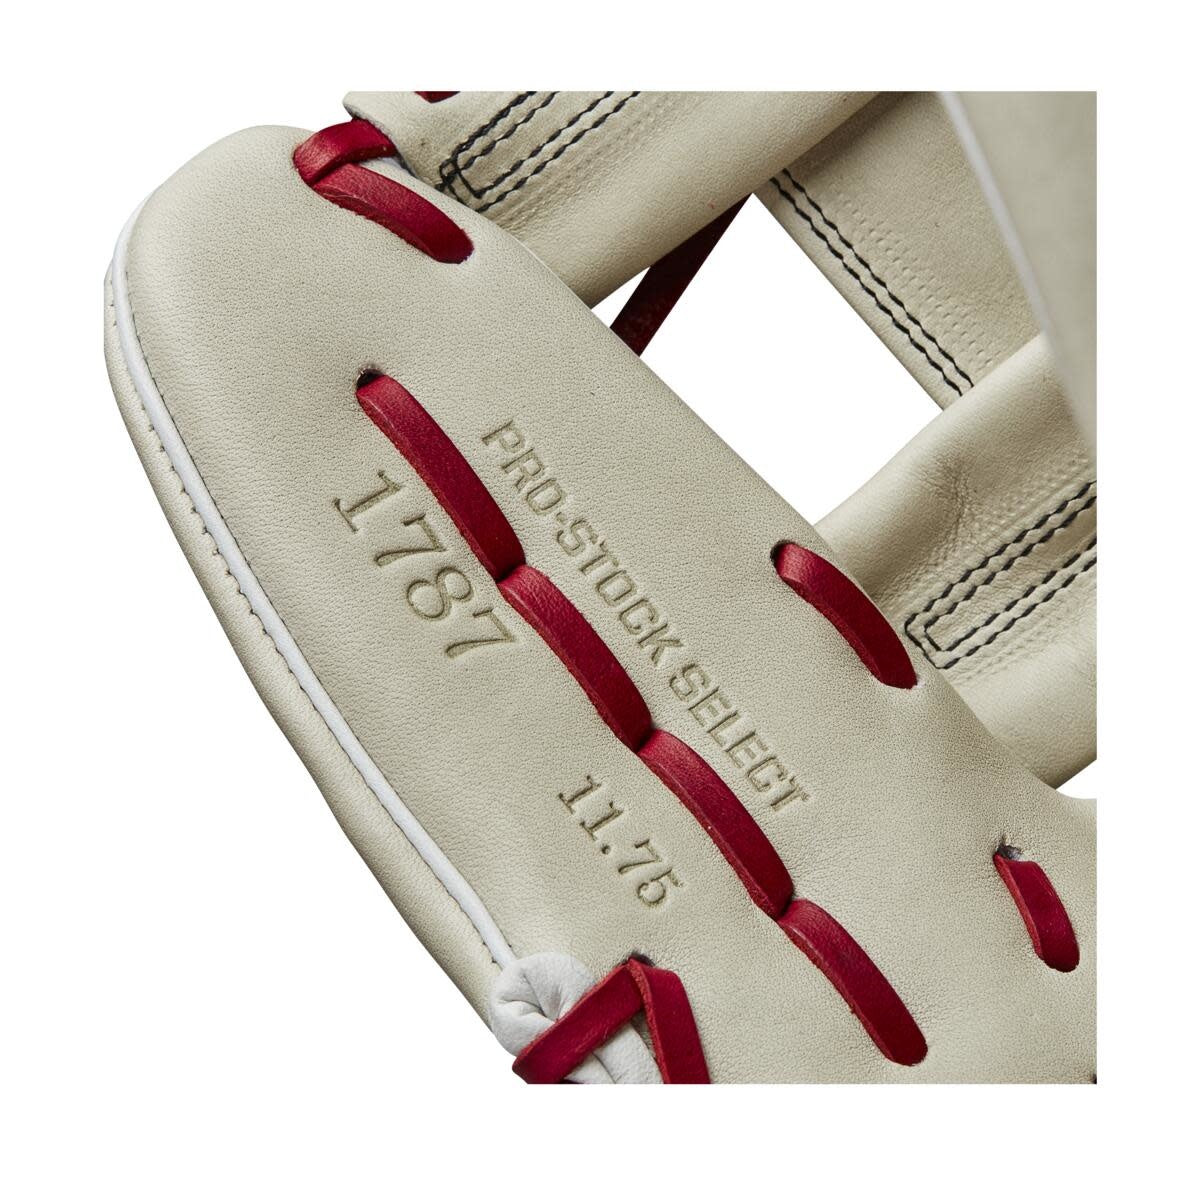 Wilson 2022 June Glove of the Month (GOTM) A2K 1787 Silver/Re